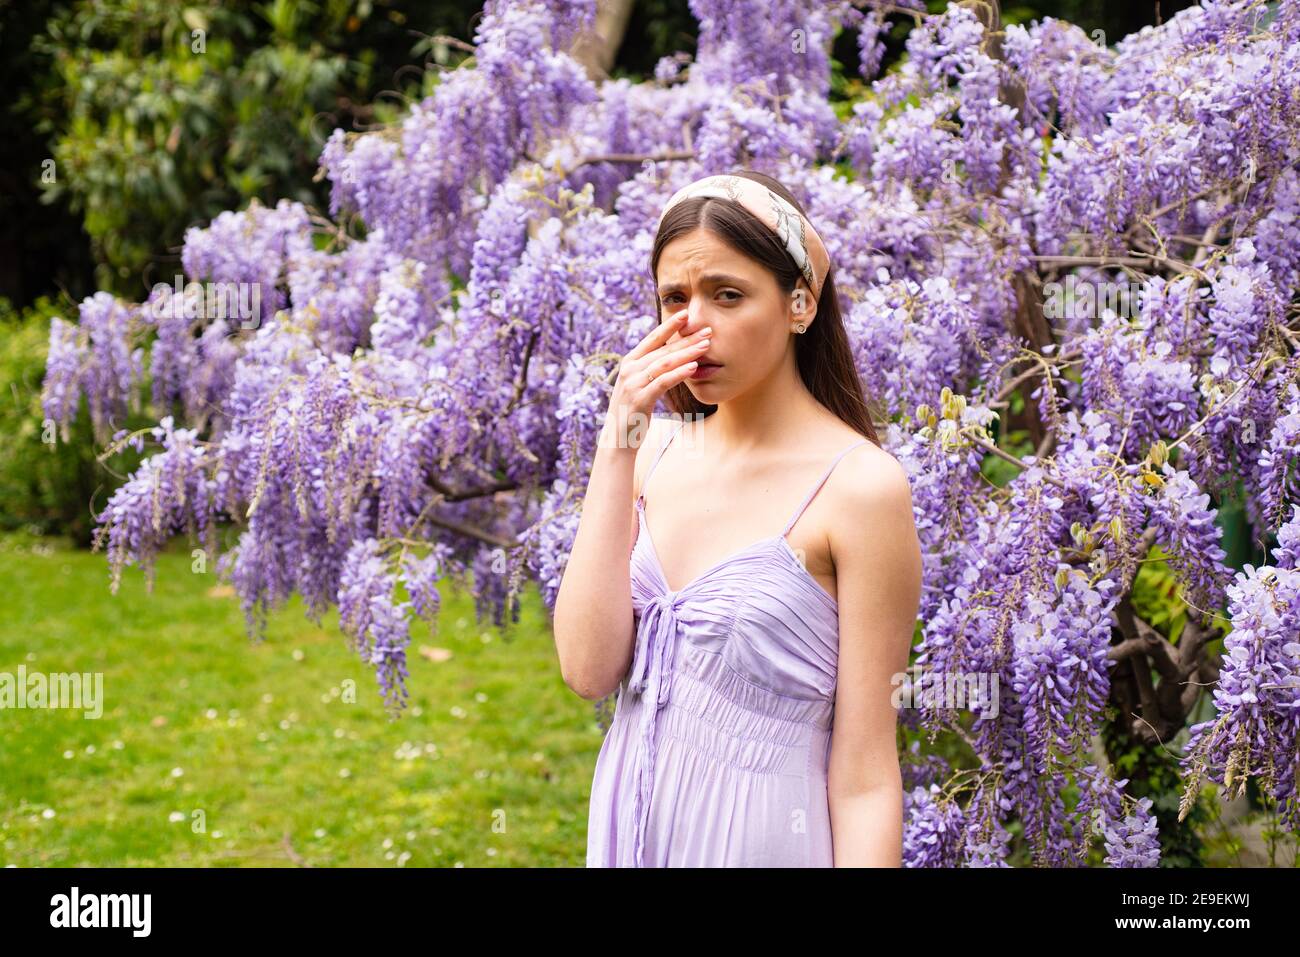 Spring allergy nose sneezing. Allergic symptoms. Woman allergic to blossom. Stock Photo